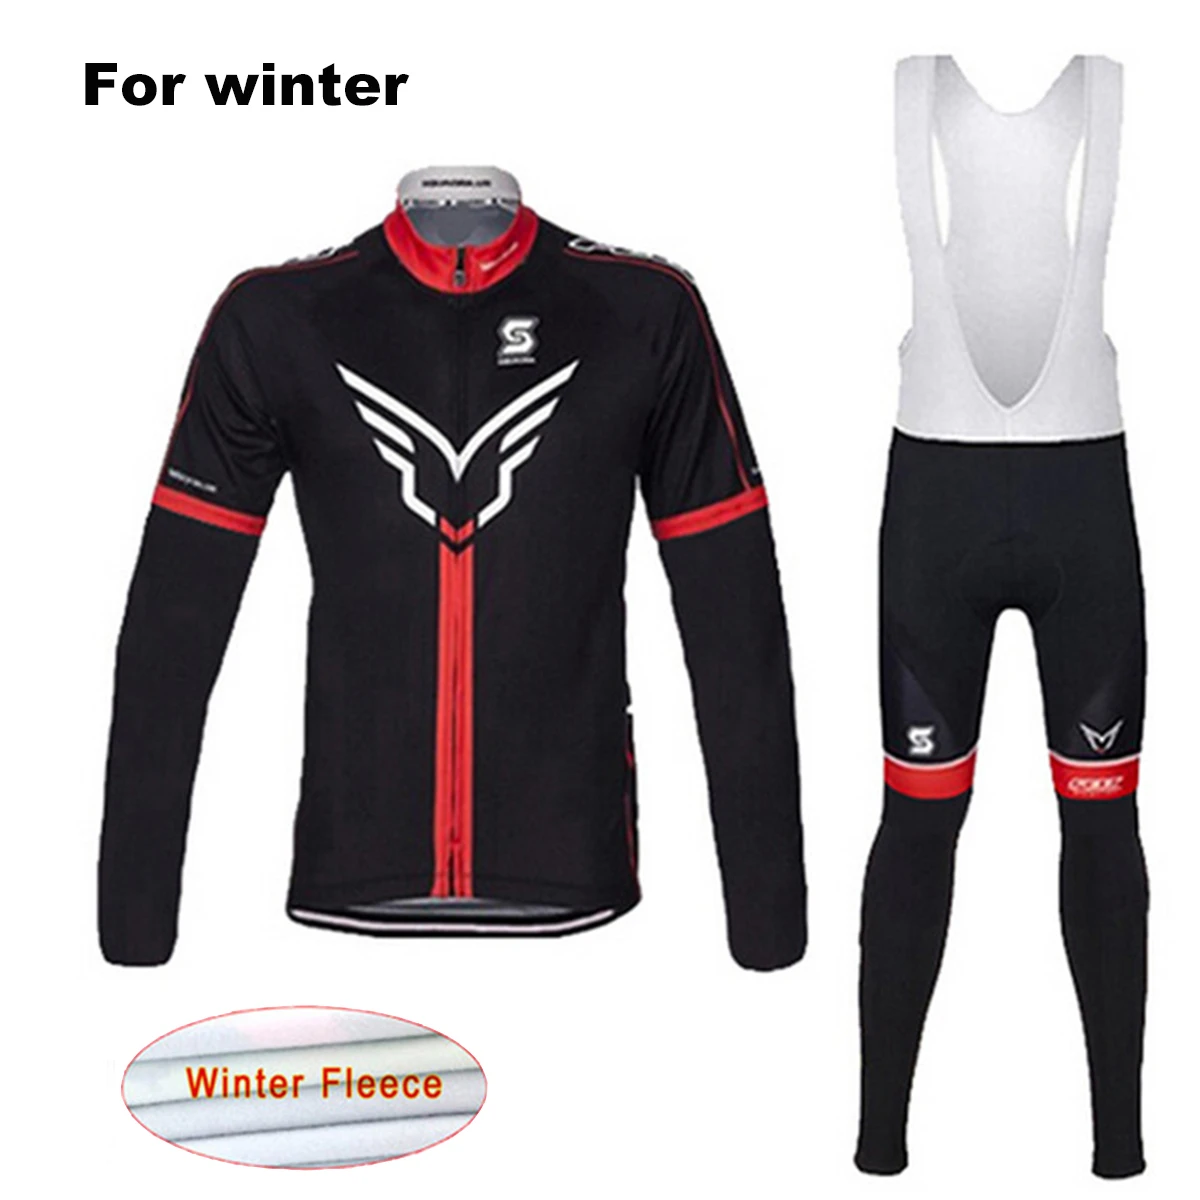 Betuttelen Zie insecten Overtreden Thermal Fleece Winter Felt Team Cycling Jersey Set Long Sleeve Ropa  Ciclismo Invierno Maillot Outdoor Sport Coat Bicycle Clothes - Cycling Sets  - AliExpress